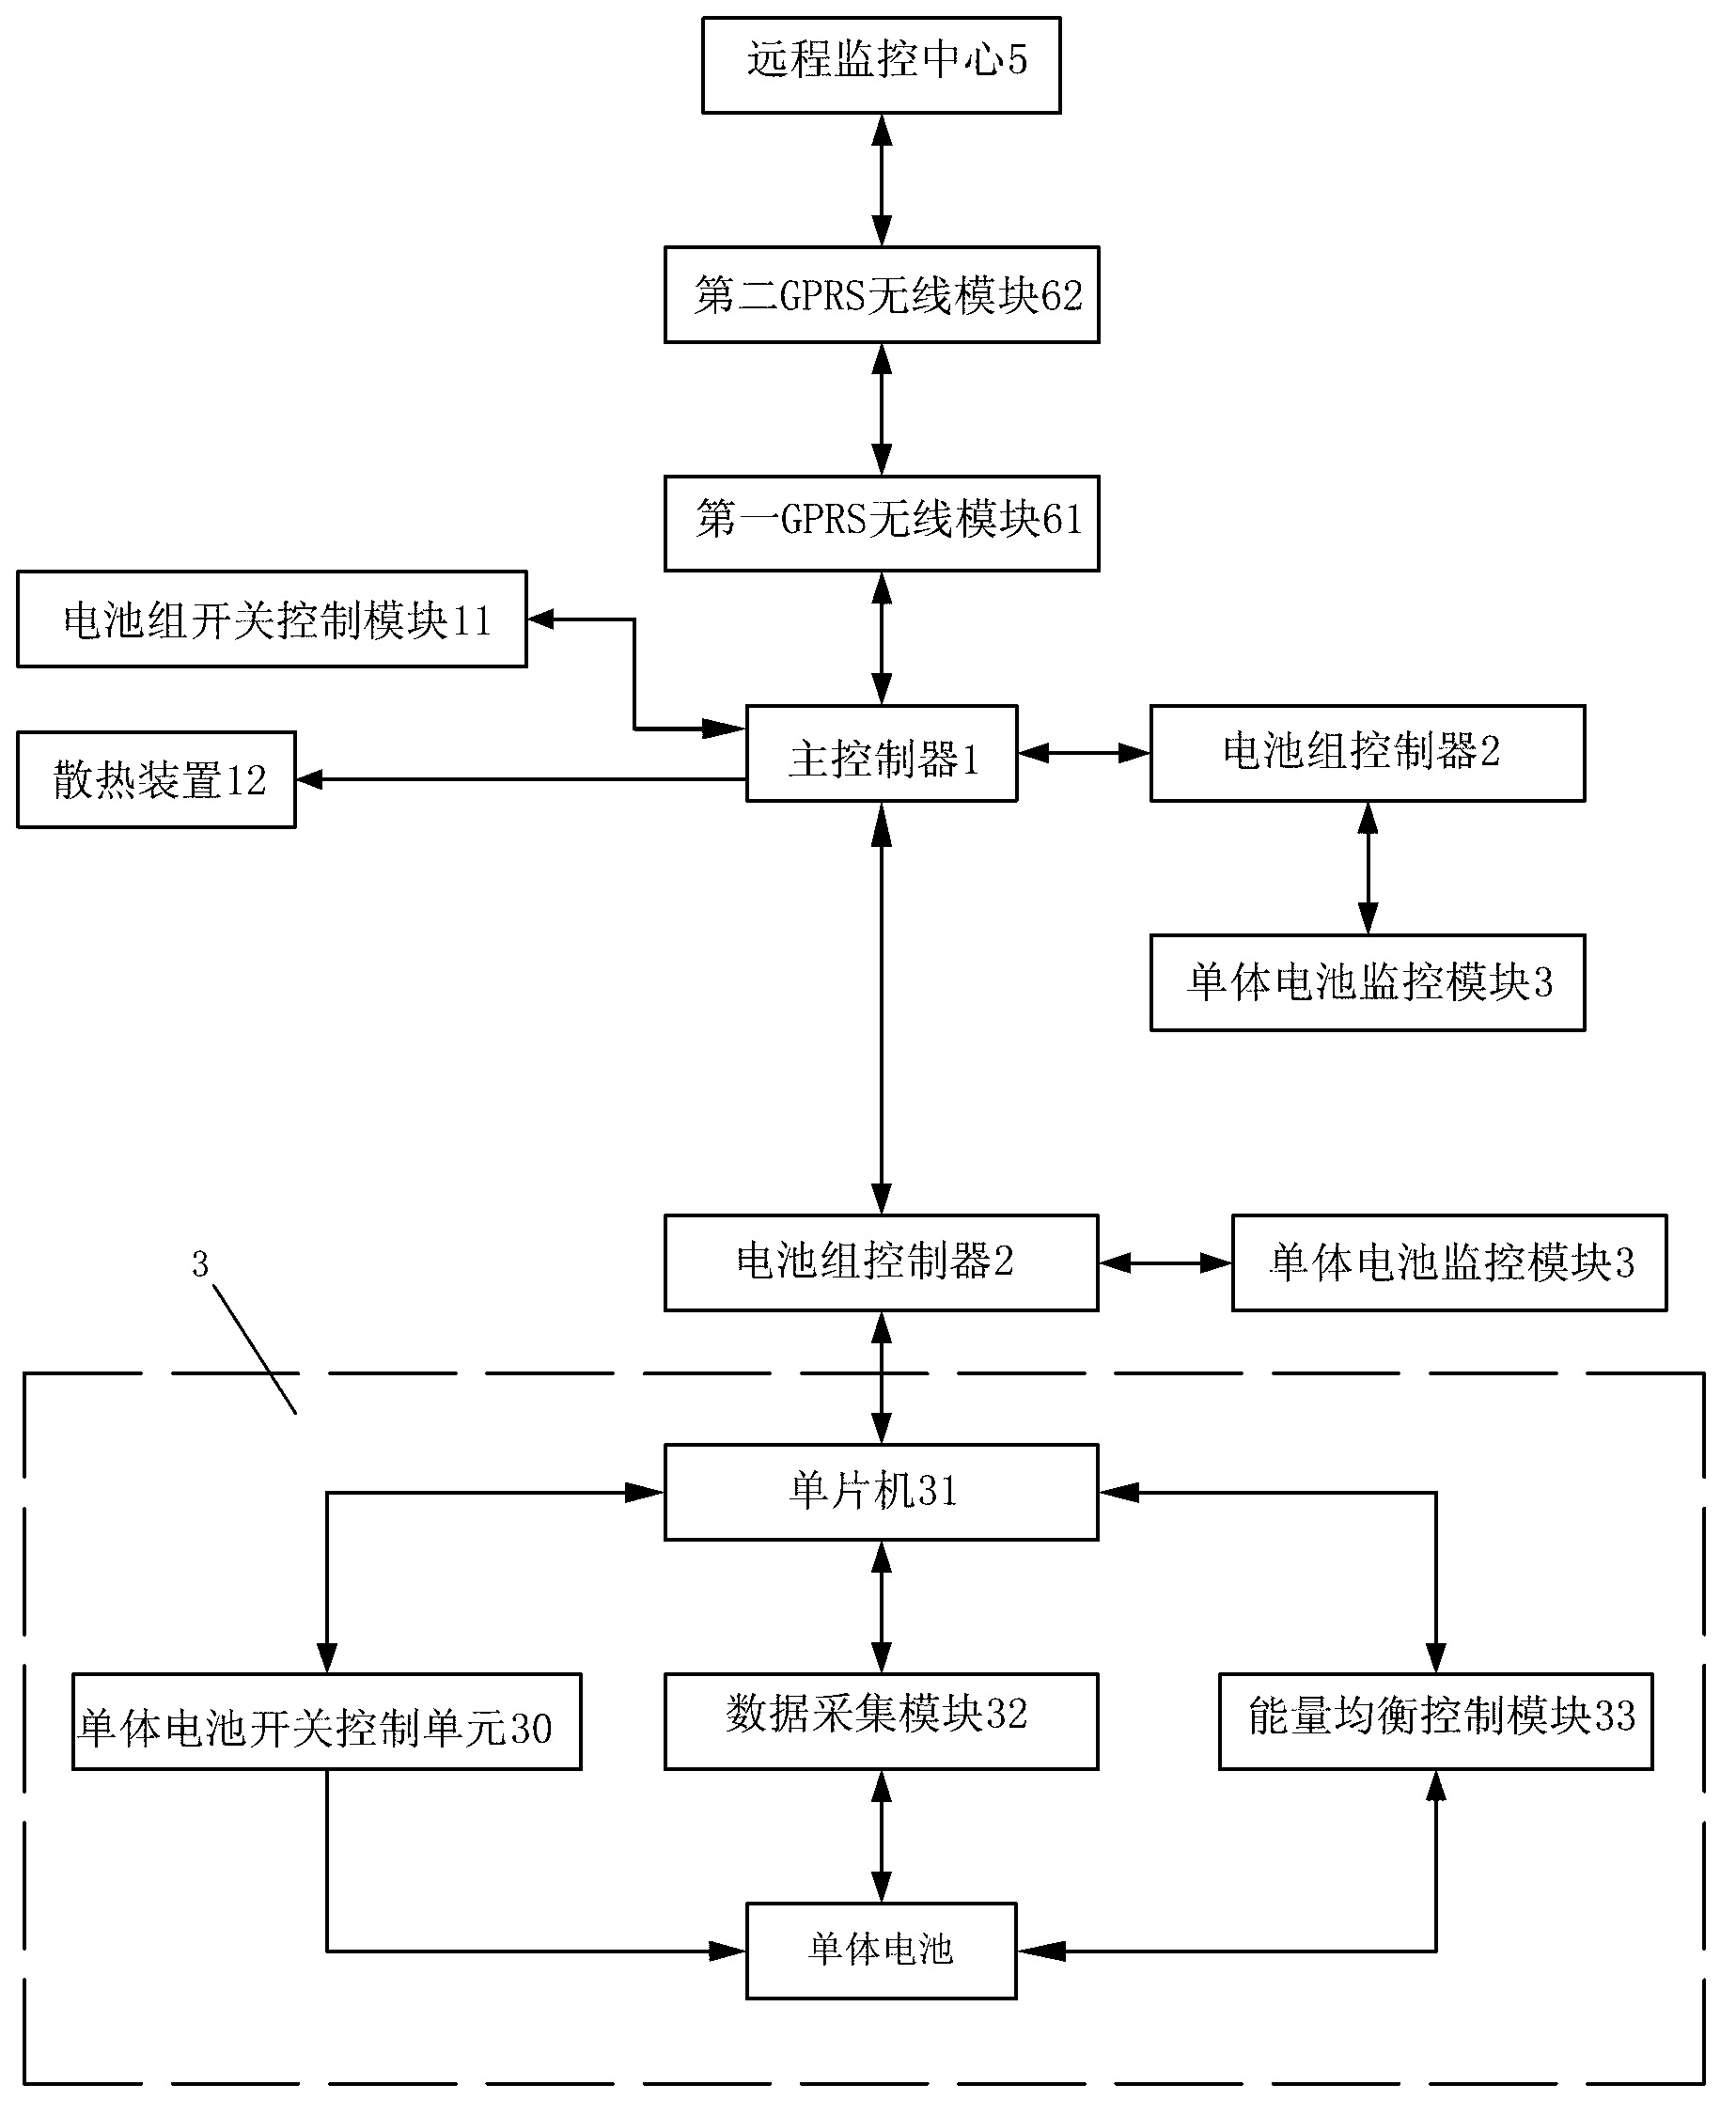 Cell management system capable of supporting network operation